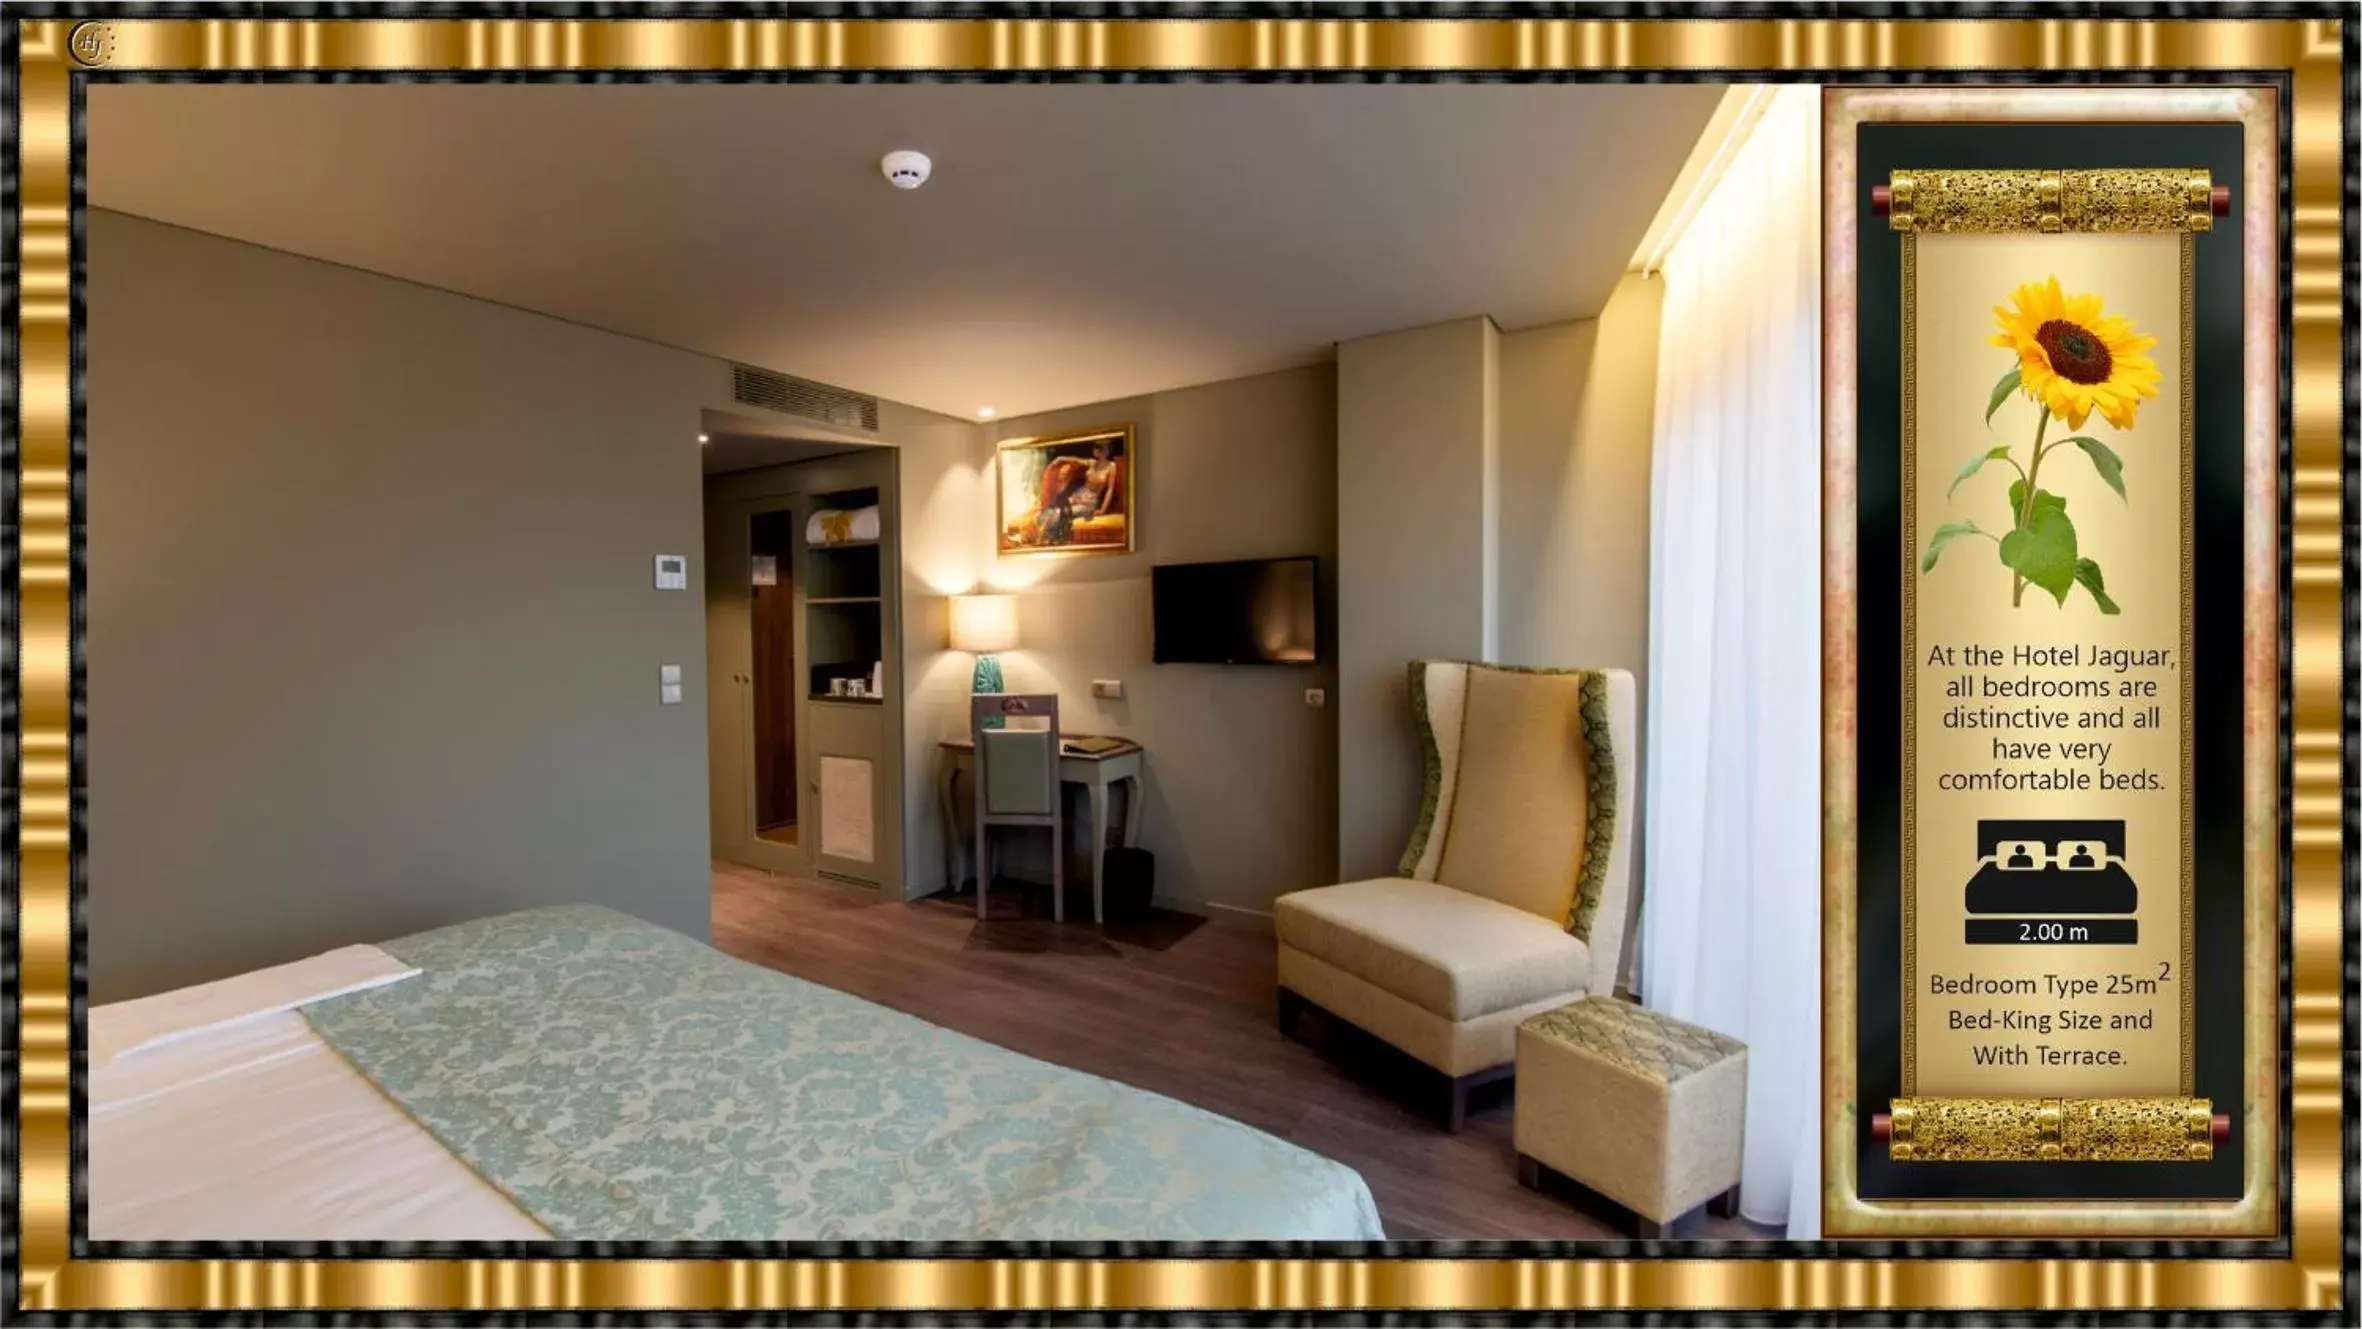 Hotel Jaguar Oporto - Airport to Hotel and City is a free Shuttle Service